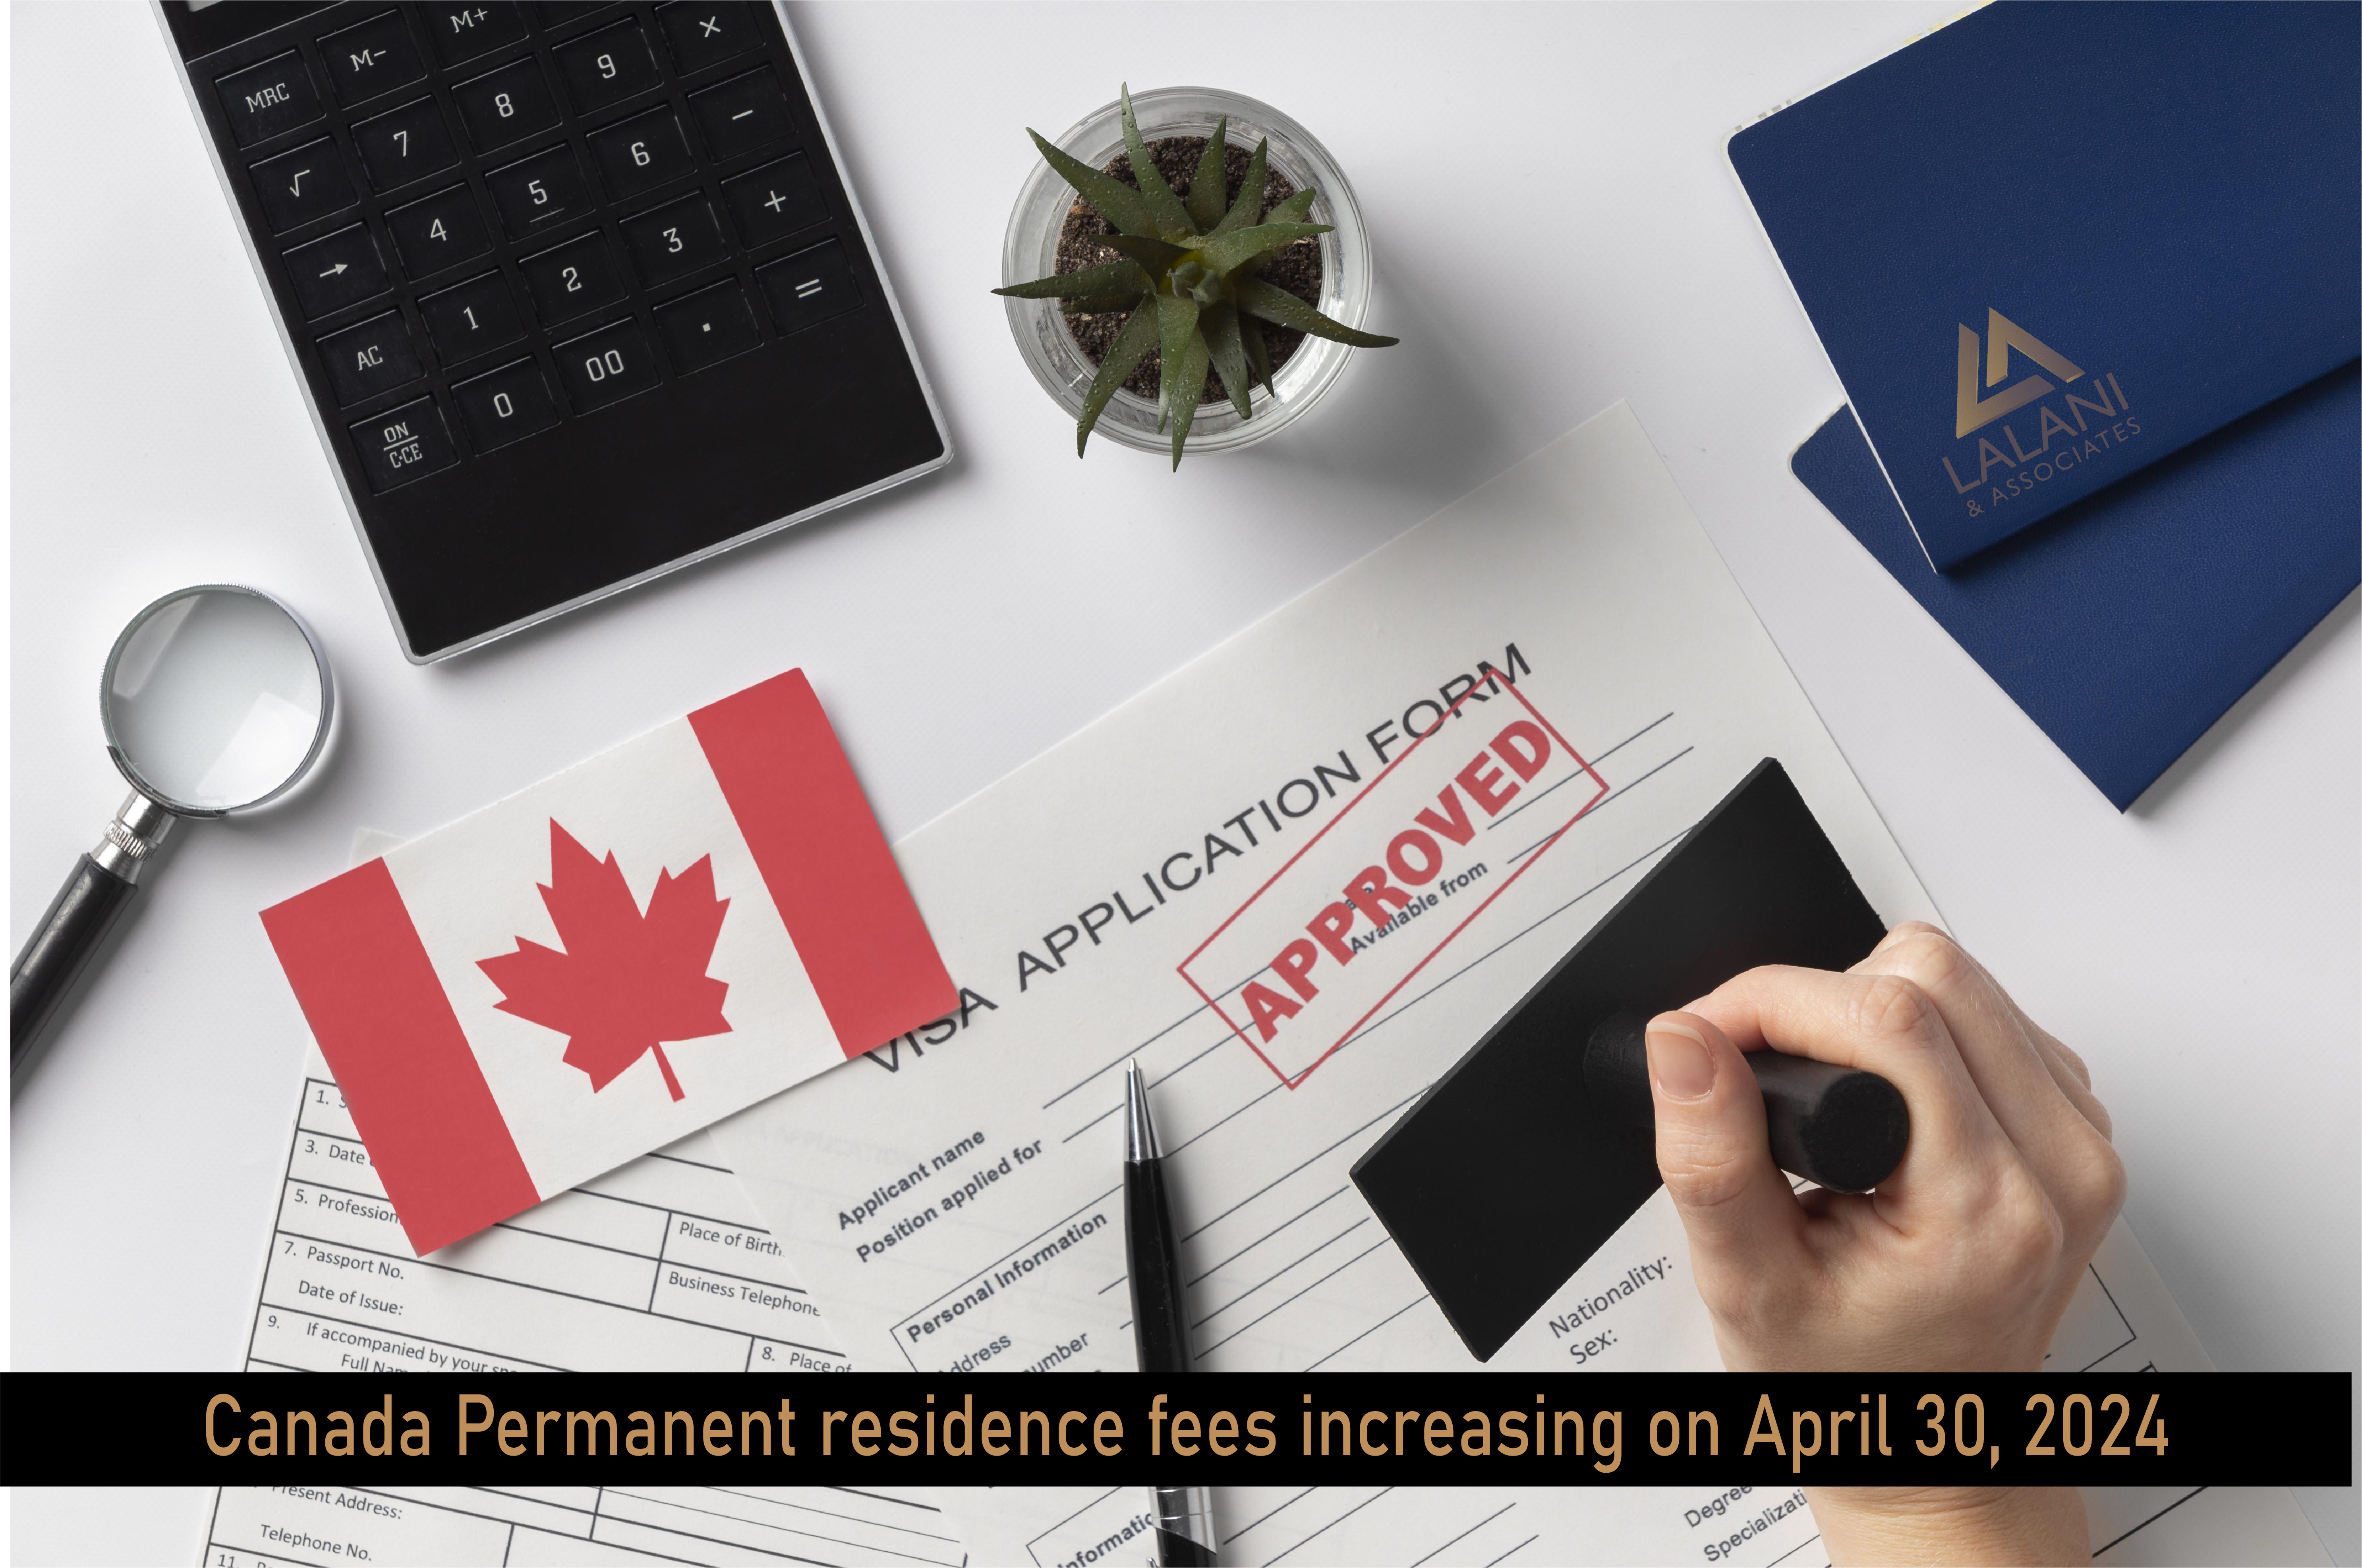 Canada Permanent residence fees increasing on April 30, 2024